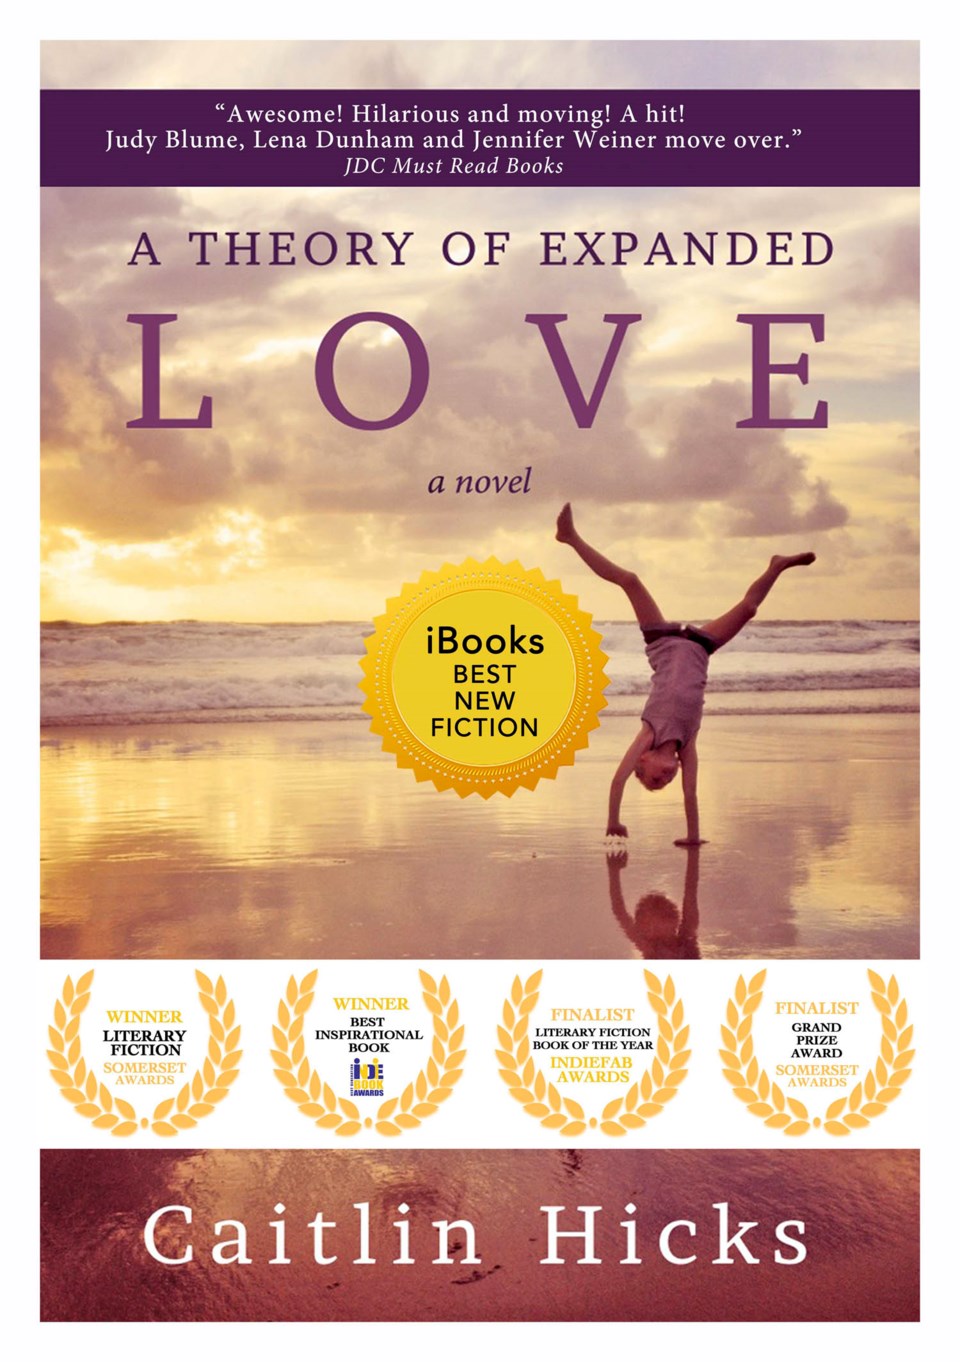 Caitlin Hicks, A Theory of Expanded Love